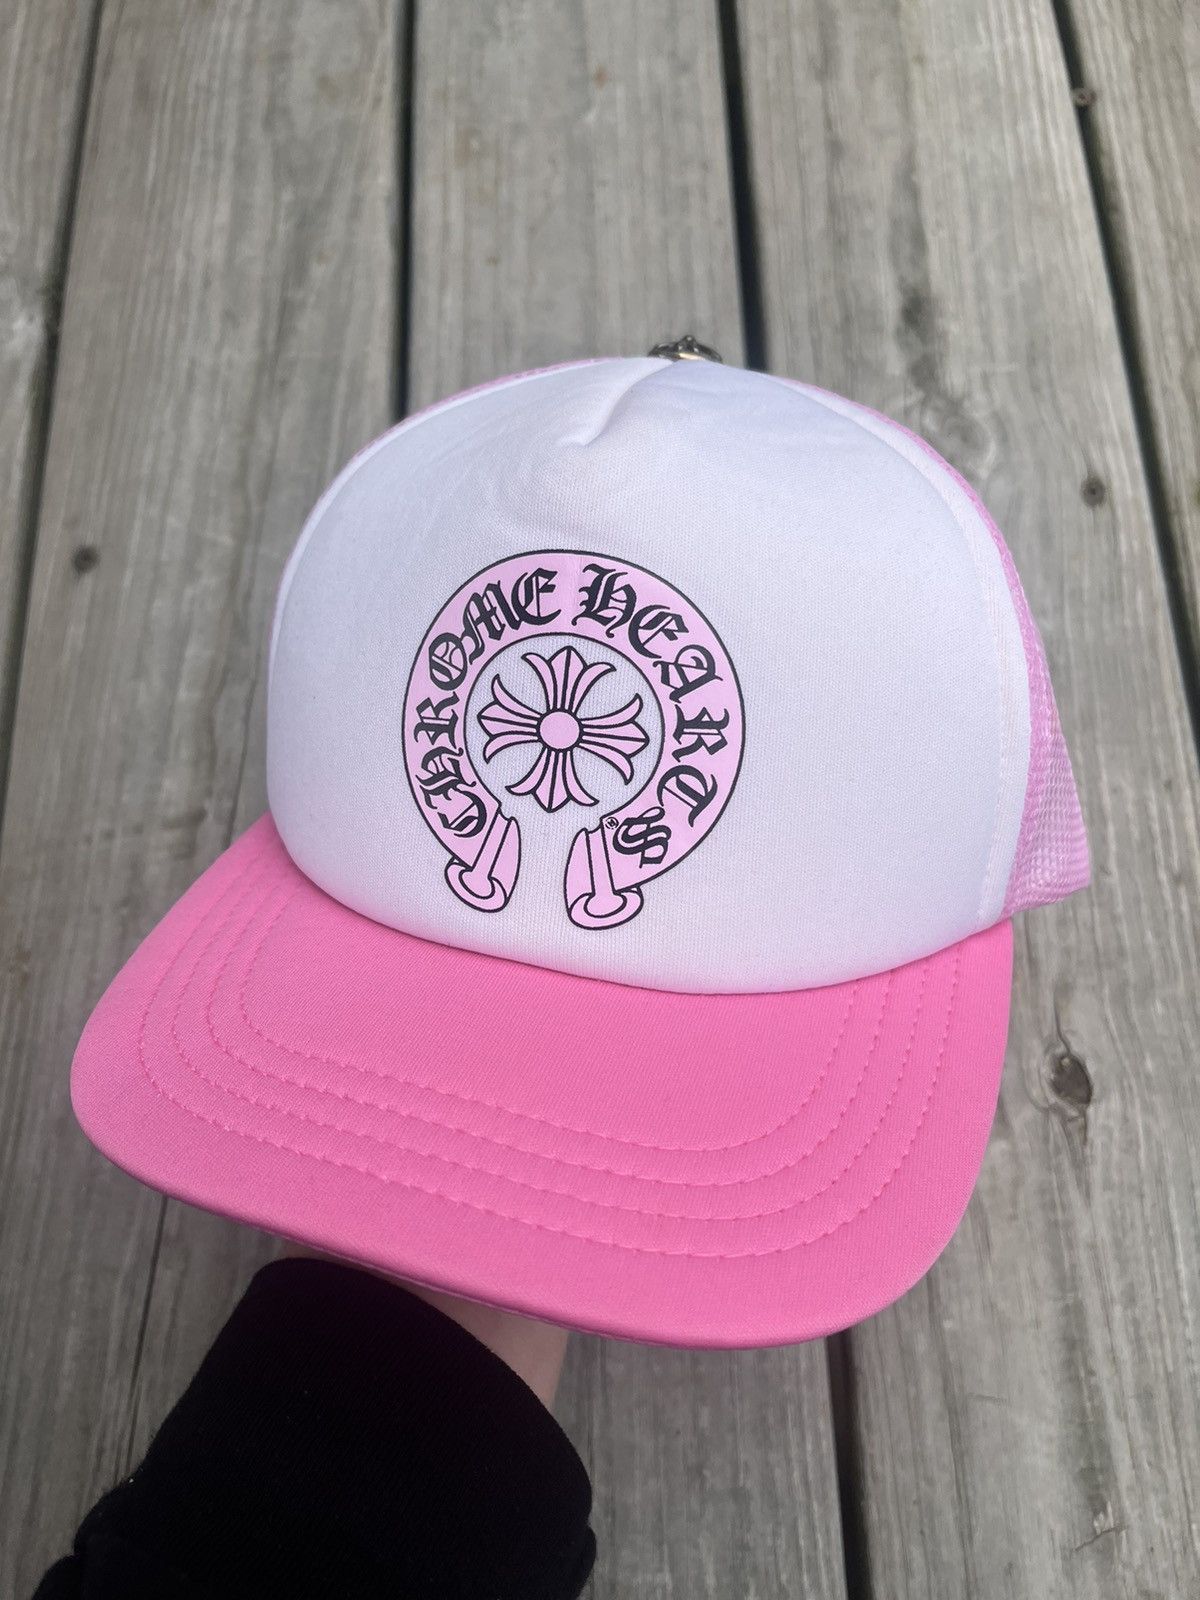 Pre-owned Chrome Hearts Pink Trucker Hat Matty Boy Sex Records Horse Shoe